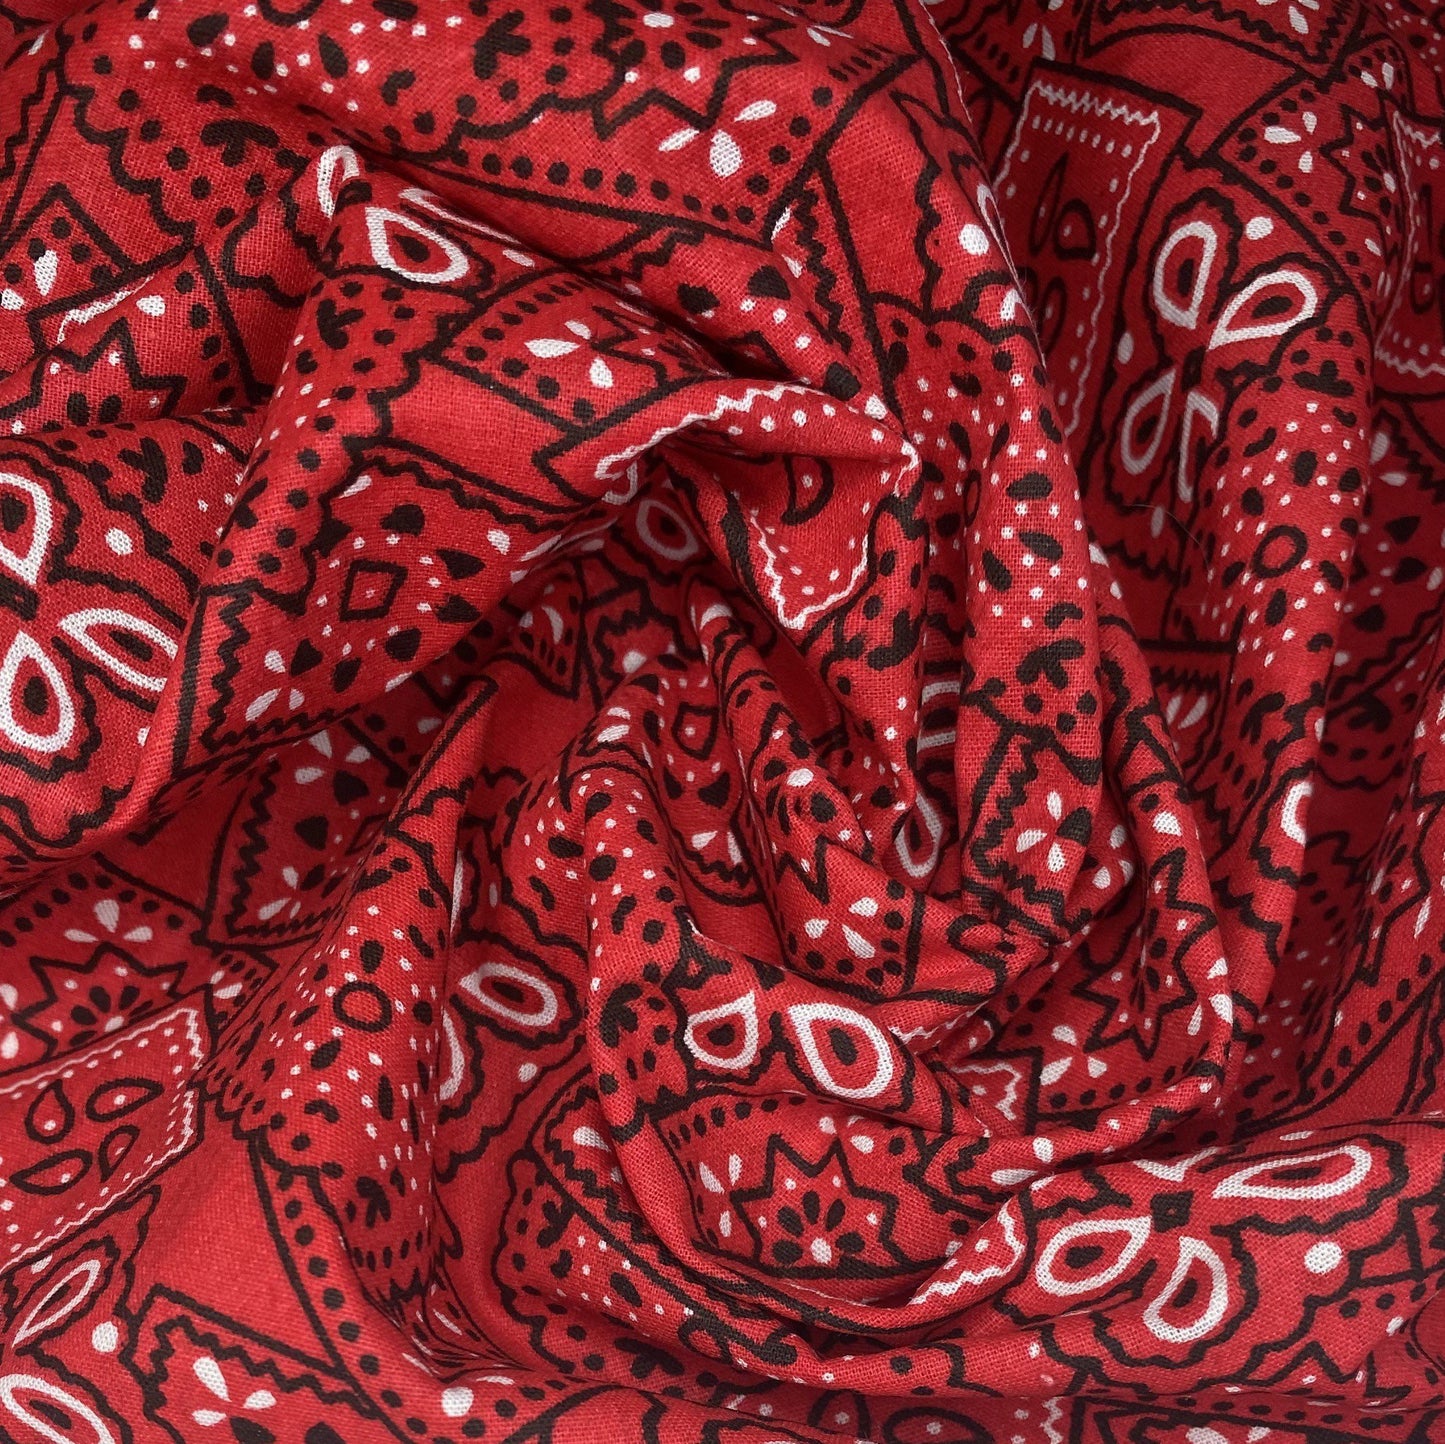 Quilting Cotton - Bandanna - 44” - Red